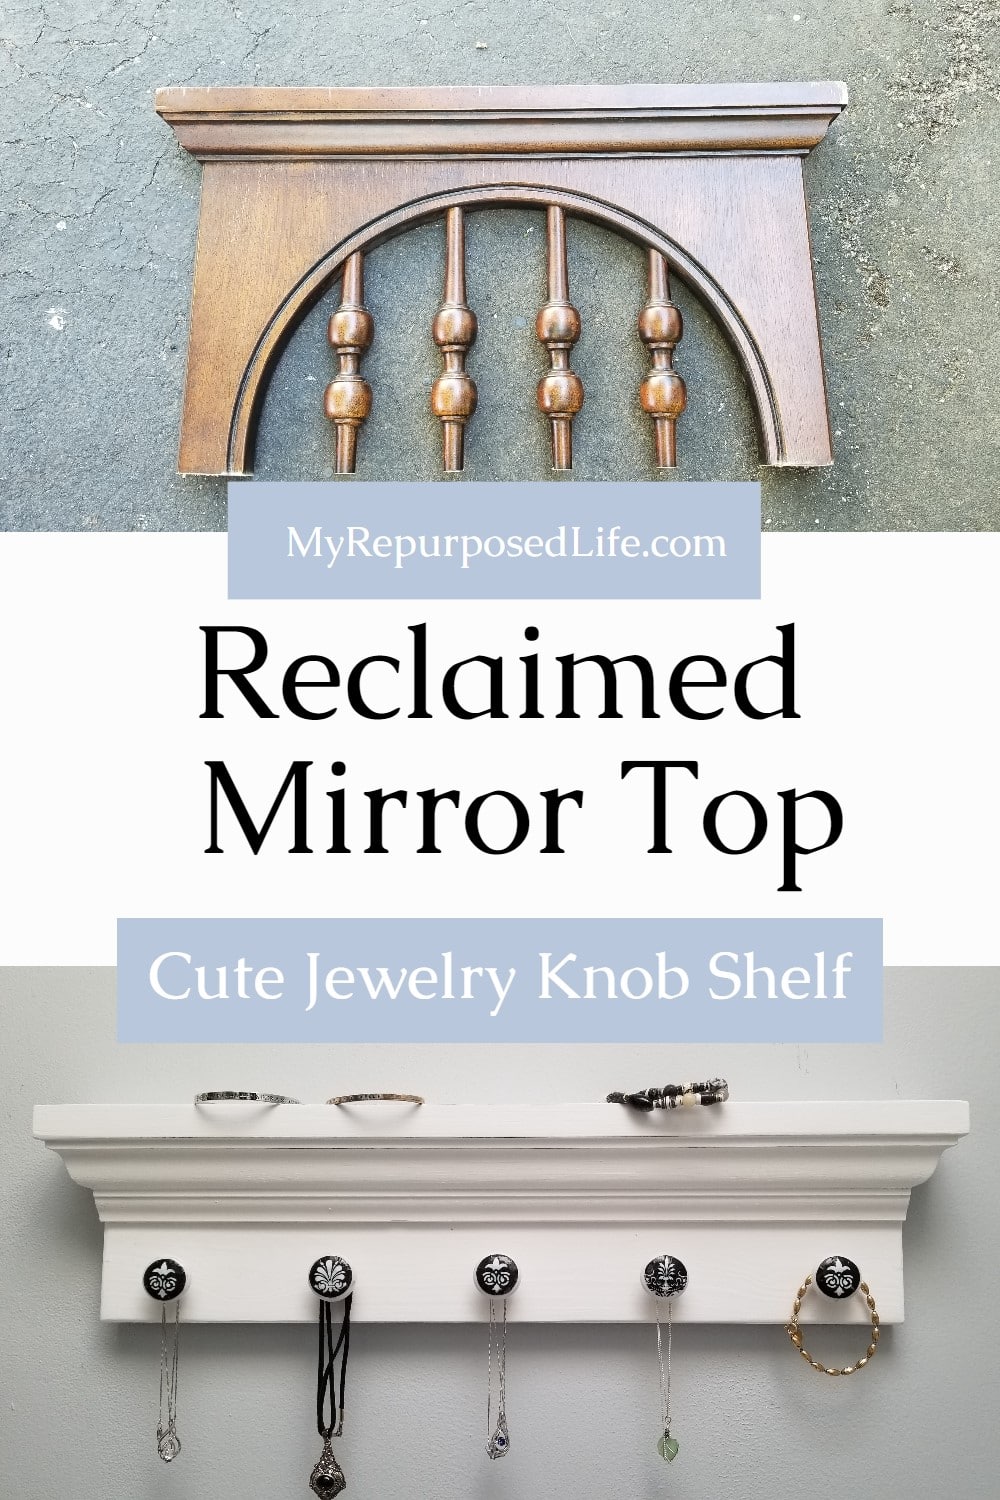 A simple DIY jewelry shelf is made from scrap molding and reclaimed cabinet knobs that have been decoupaged. #MyRepurposedLife #jewelry #shelf #hooks #reclaimed #repurposed #furniture via @repurposedlife